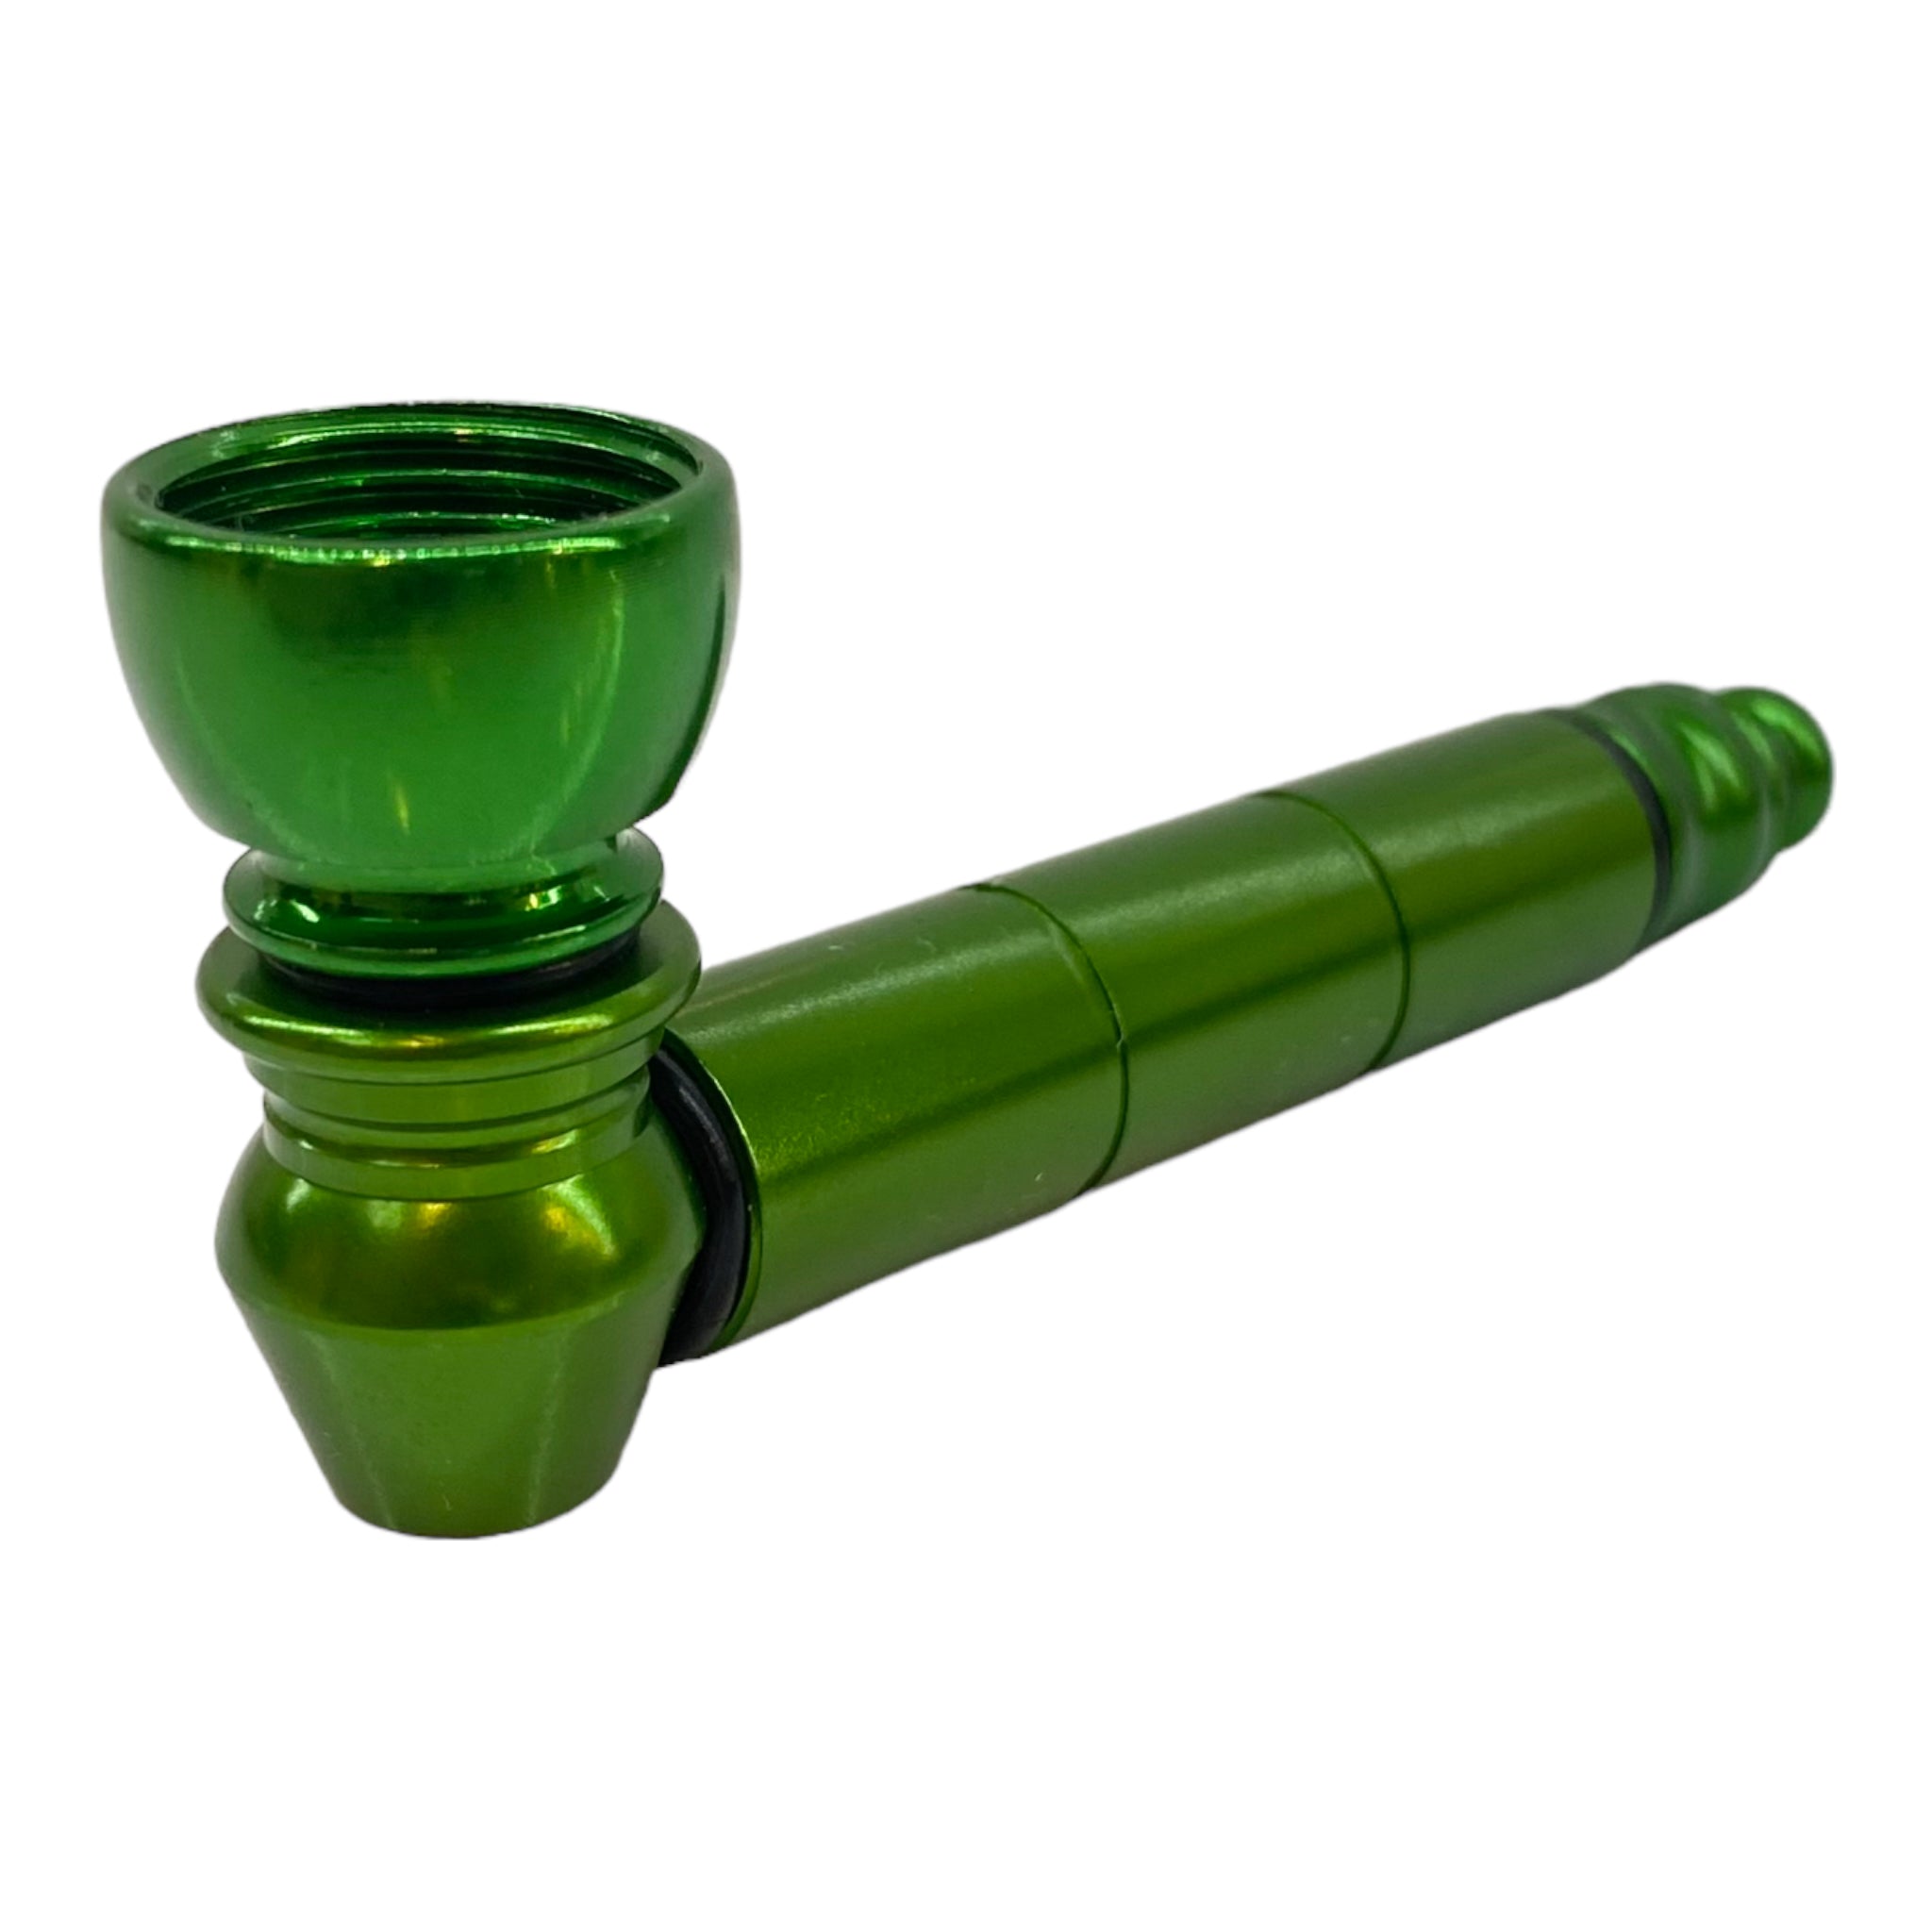 Metal Hand Pipes - Green Basic Metal Pipe With Small Chamber